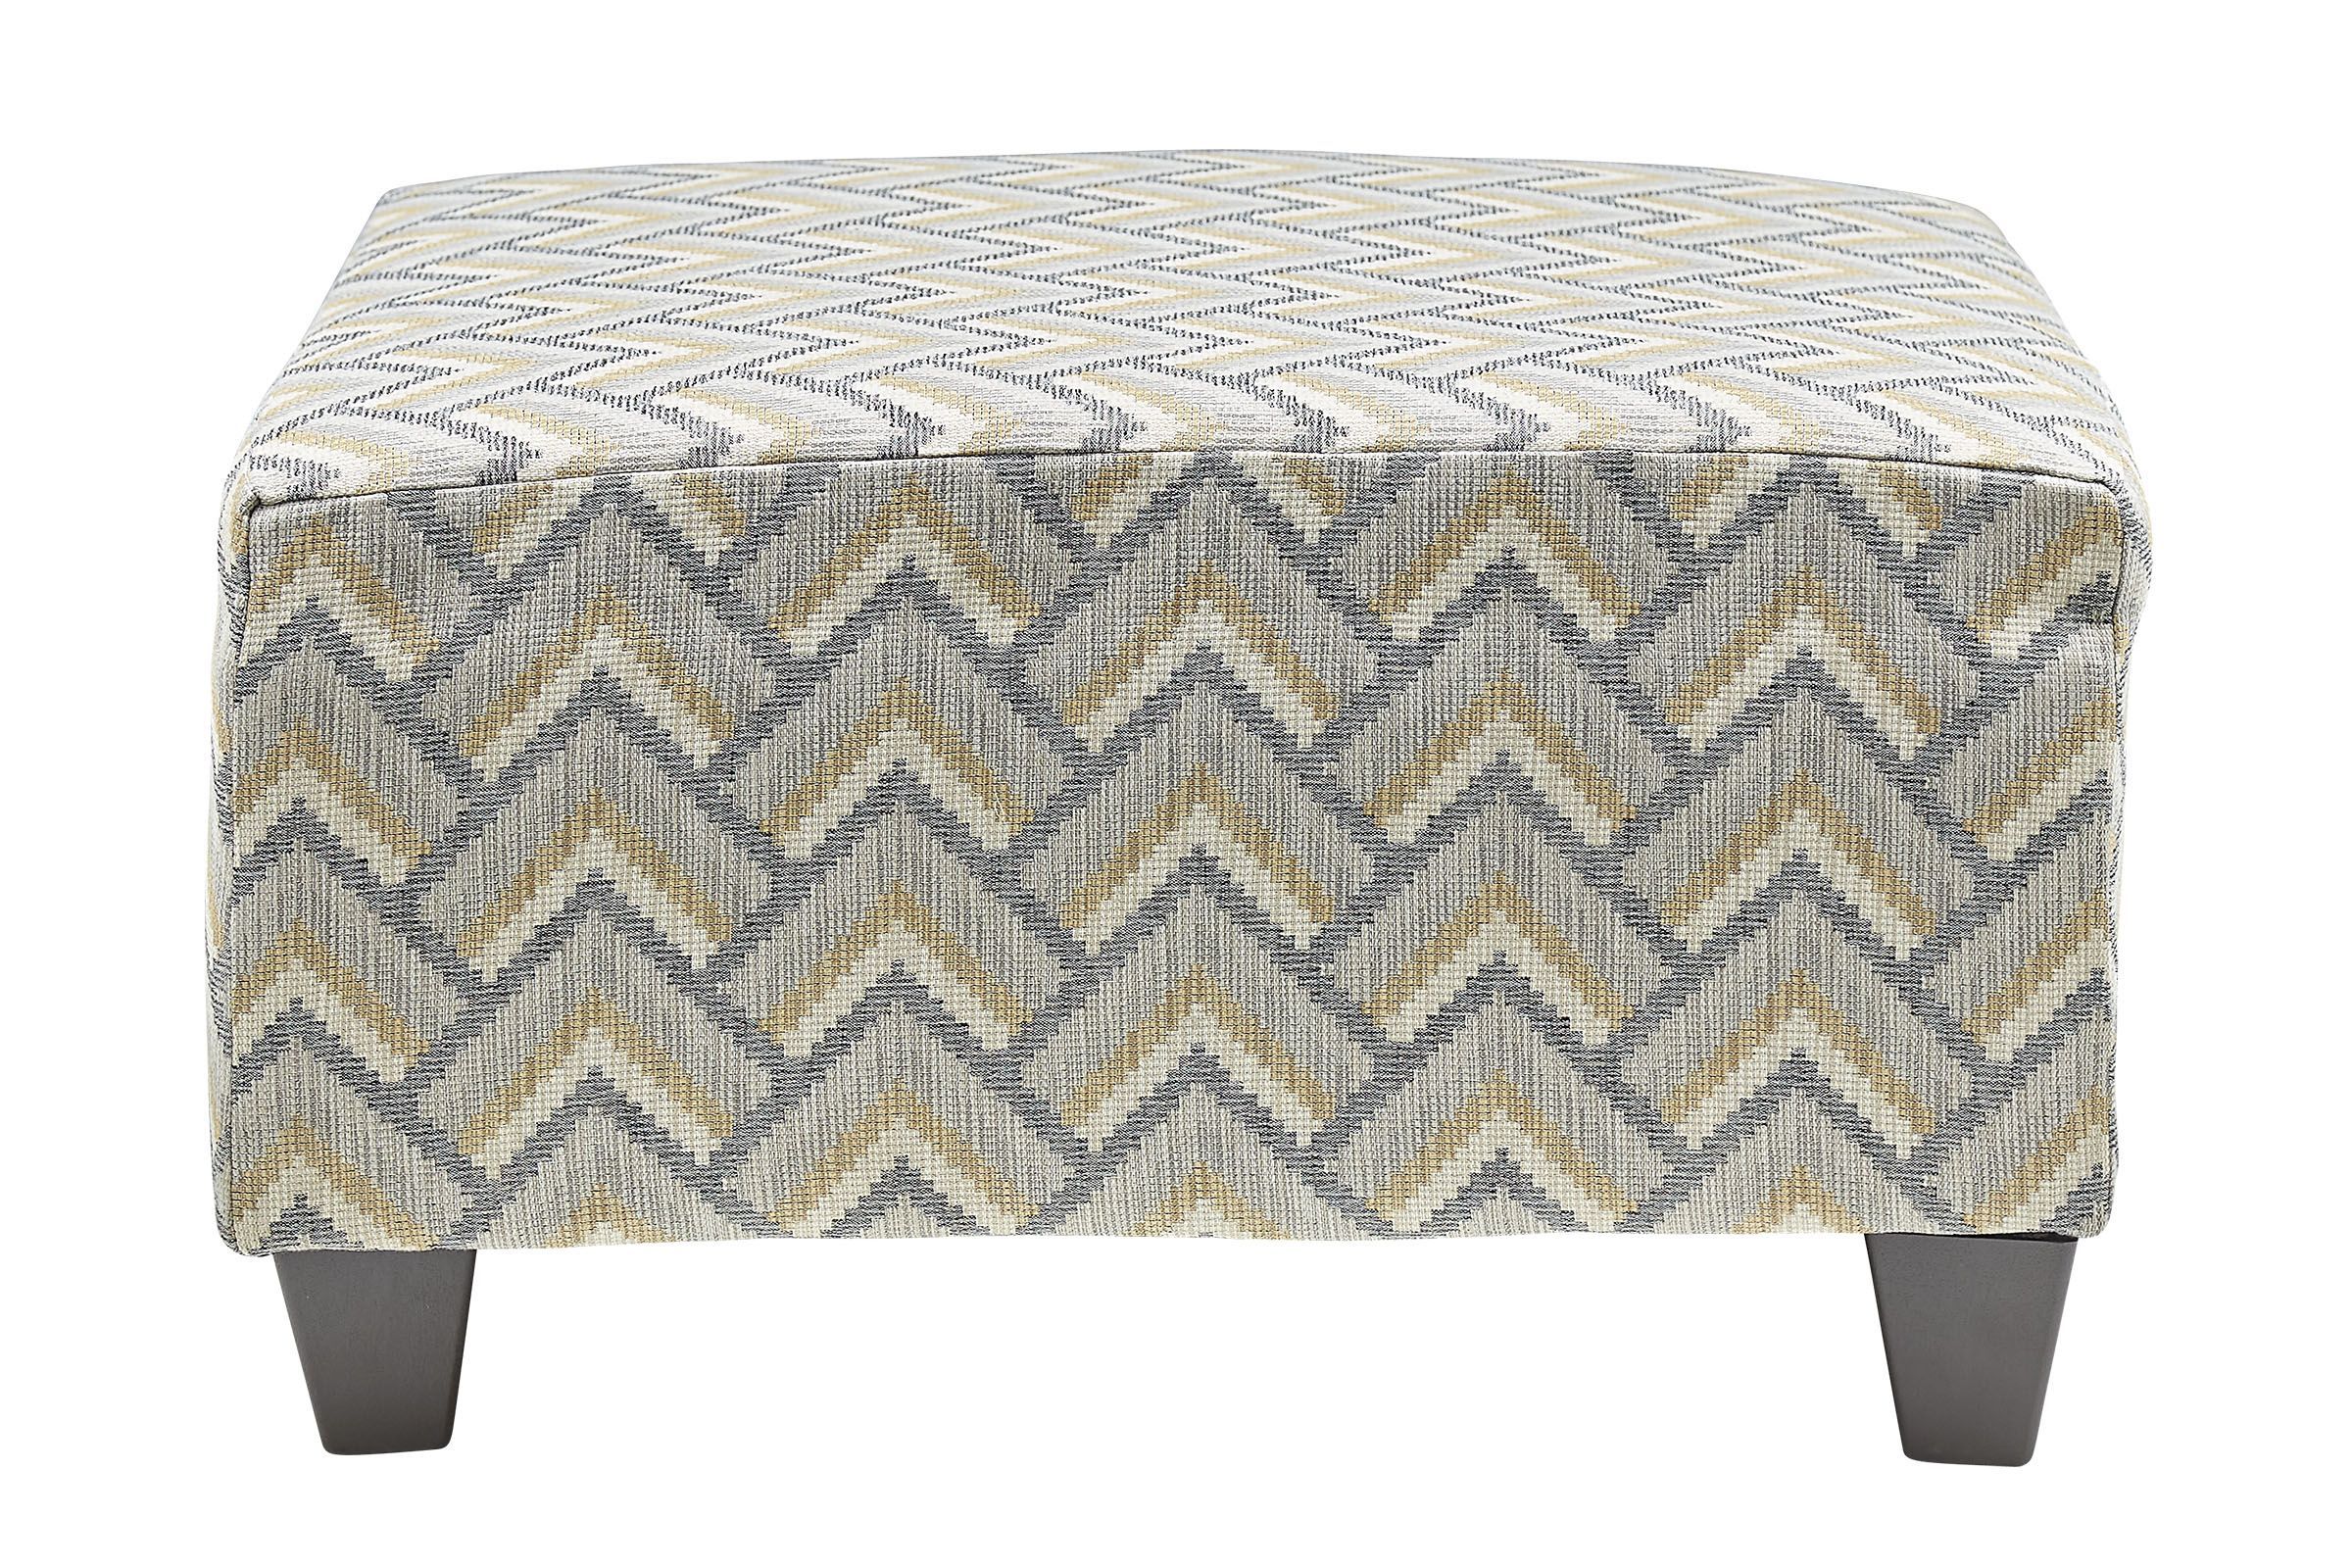 Albany Titanium Cocktail Ottoman At Gardner White Intended For Ottomans With Titanium Frame (View 8 of 15)